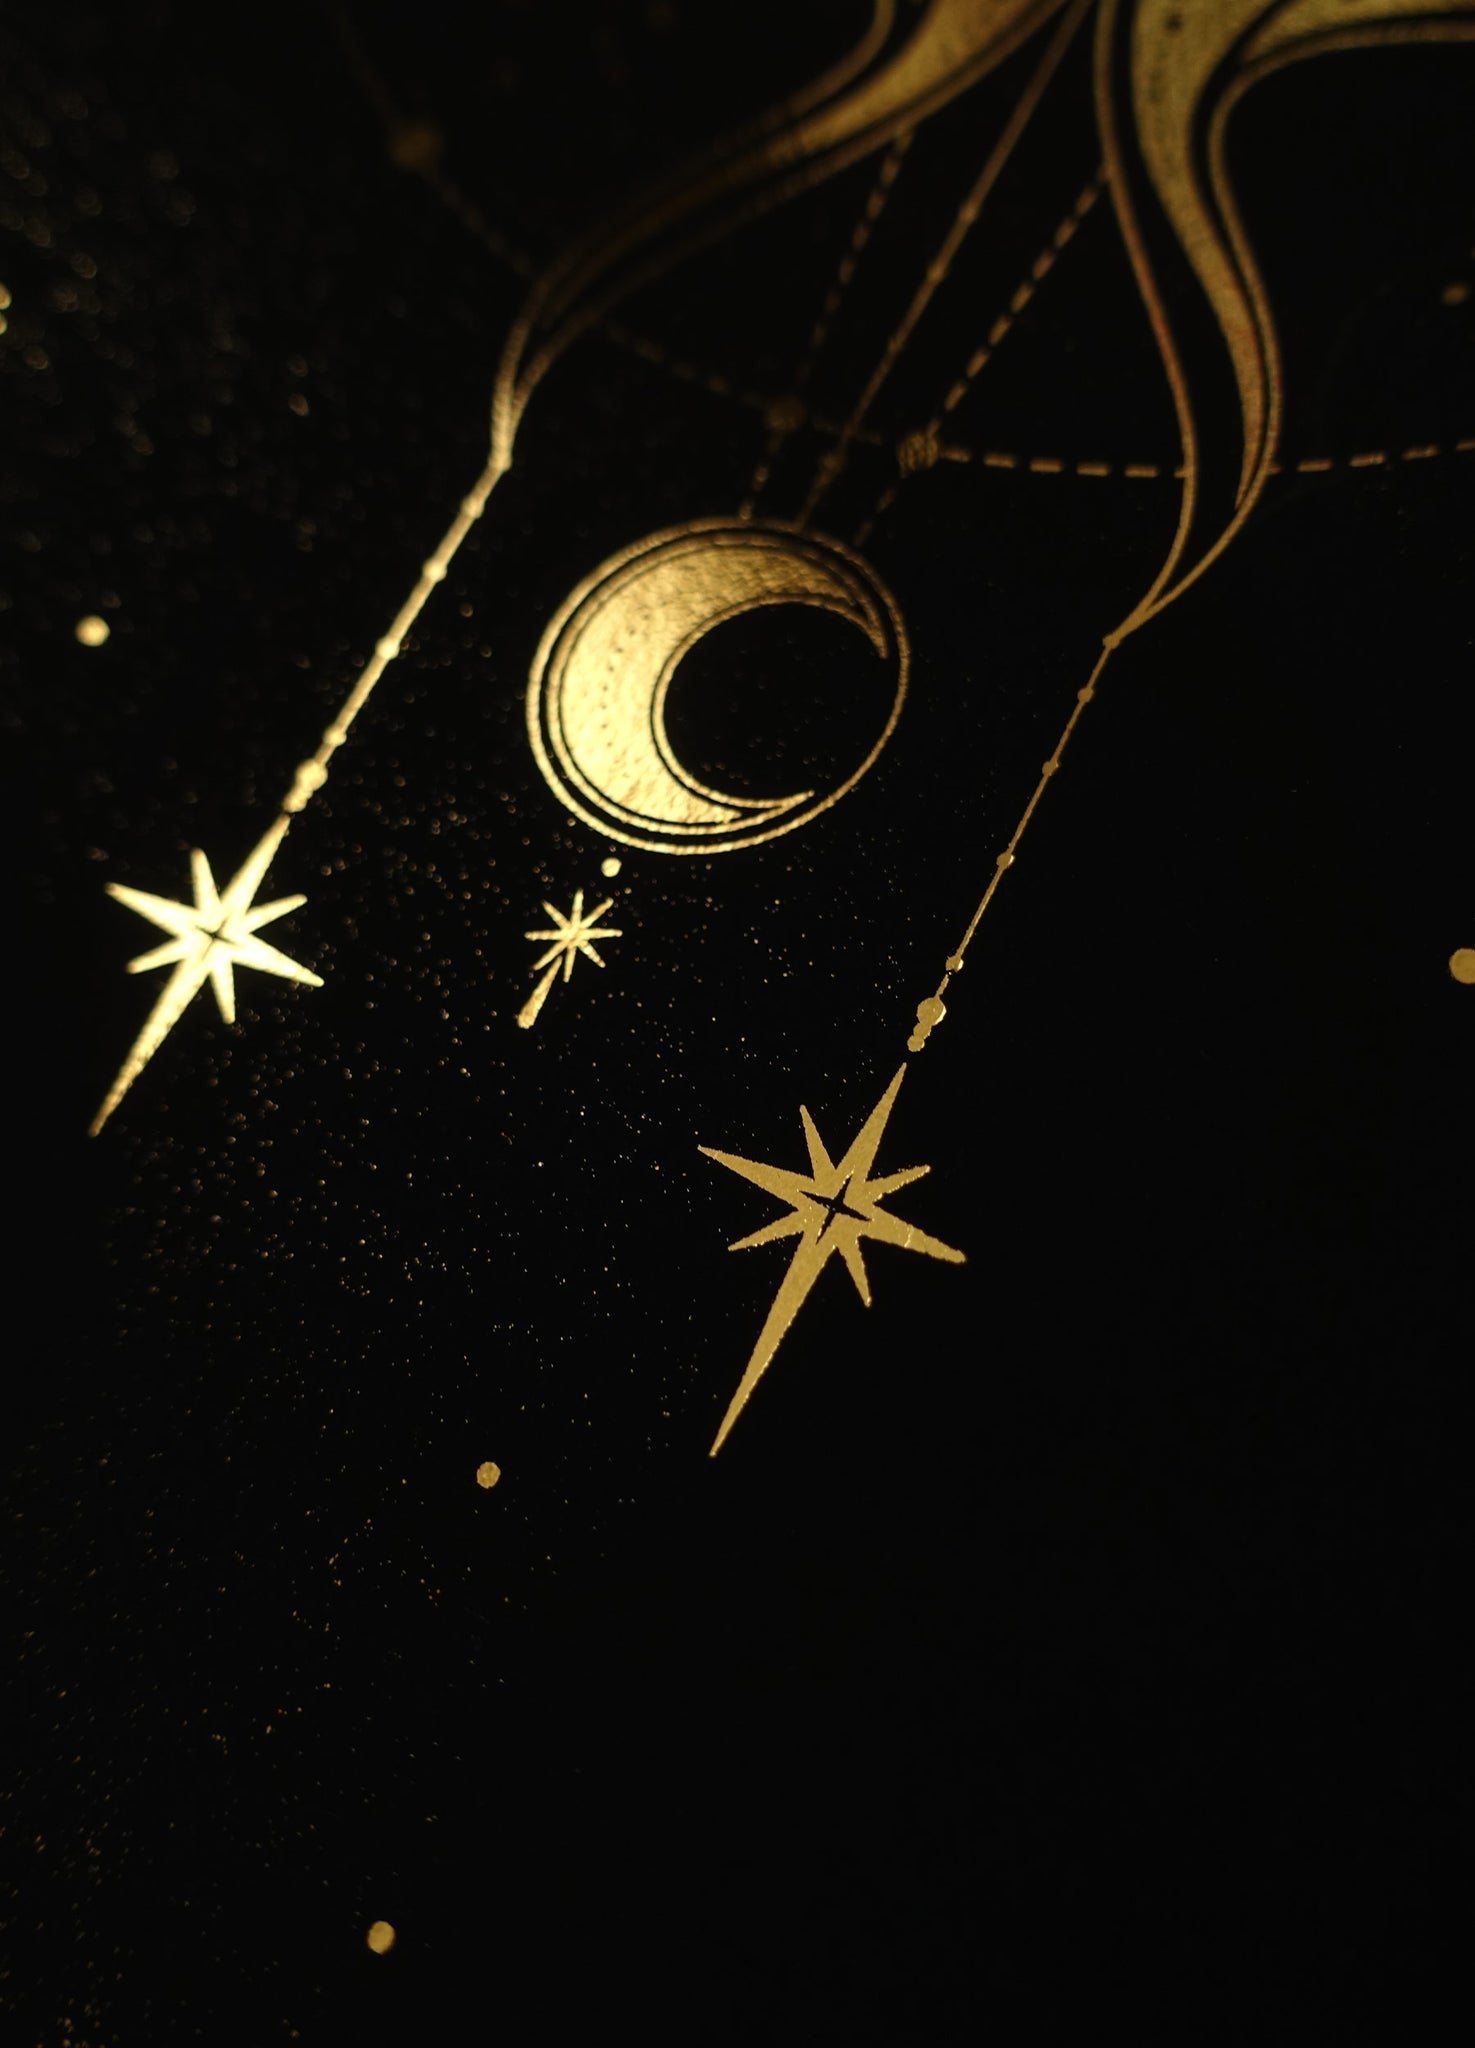 Cosmic Butterfly, gold foil and black paper with stars and moon by Cocorrina